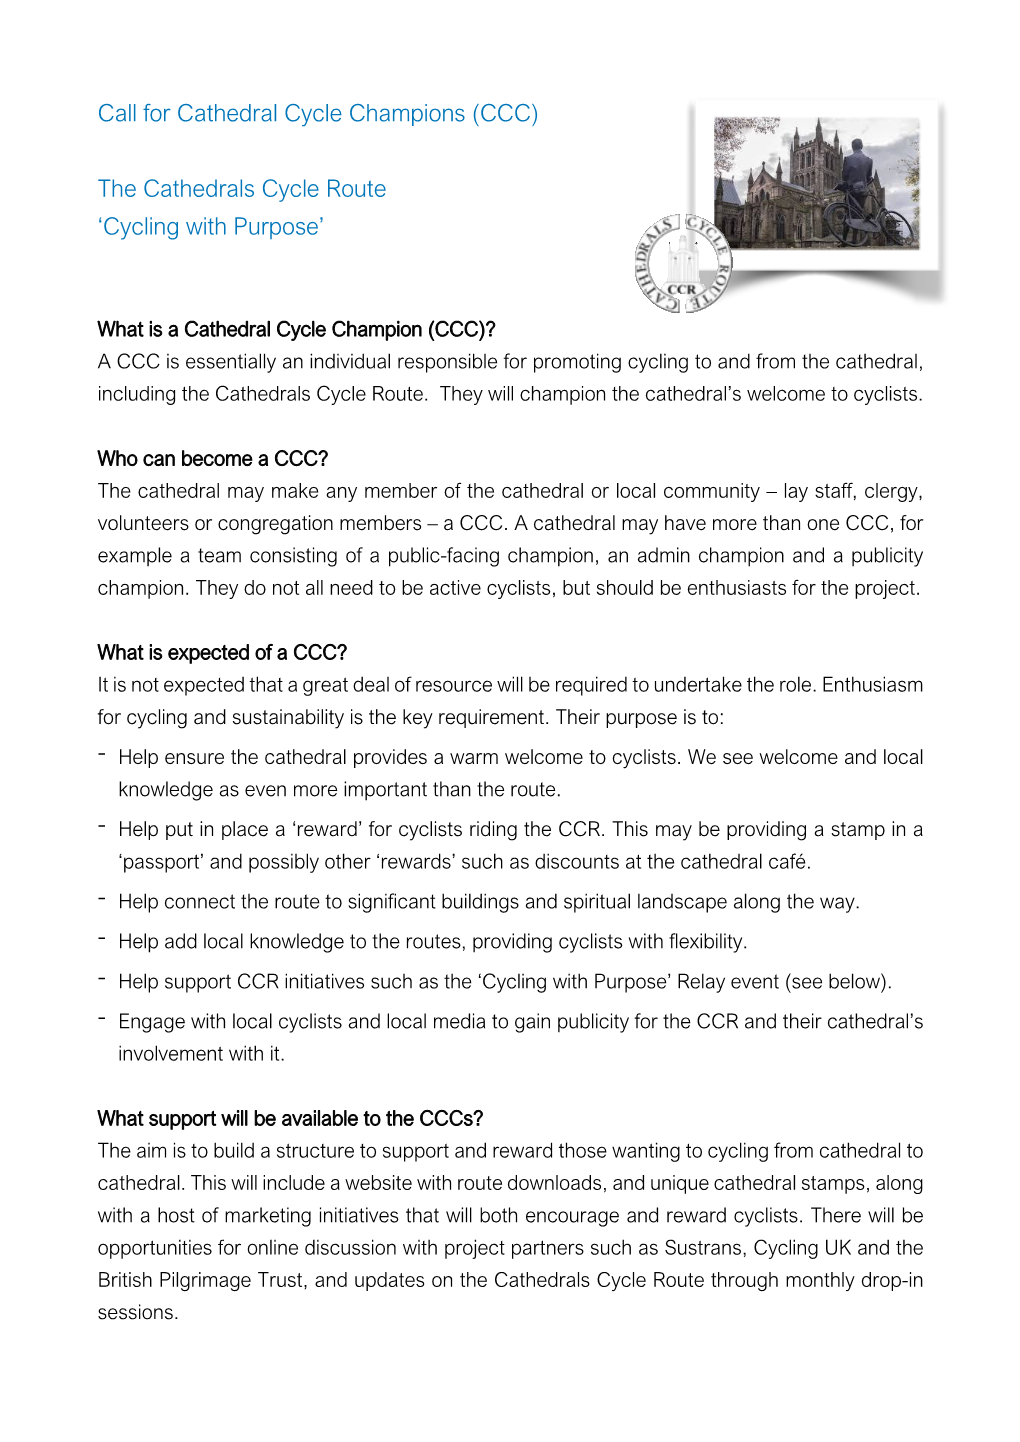 (CCC) the Cathedrals Cycle Route 'Cycling with Purpose'